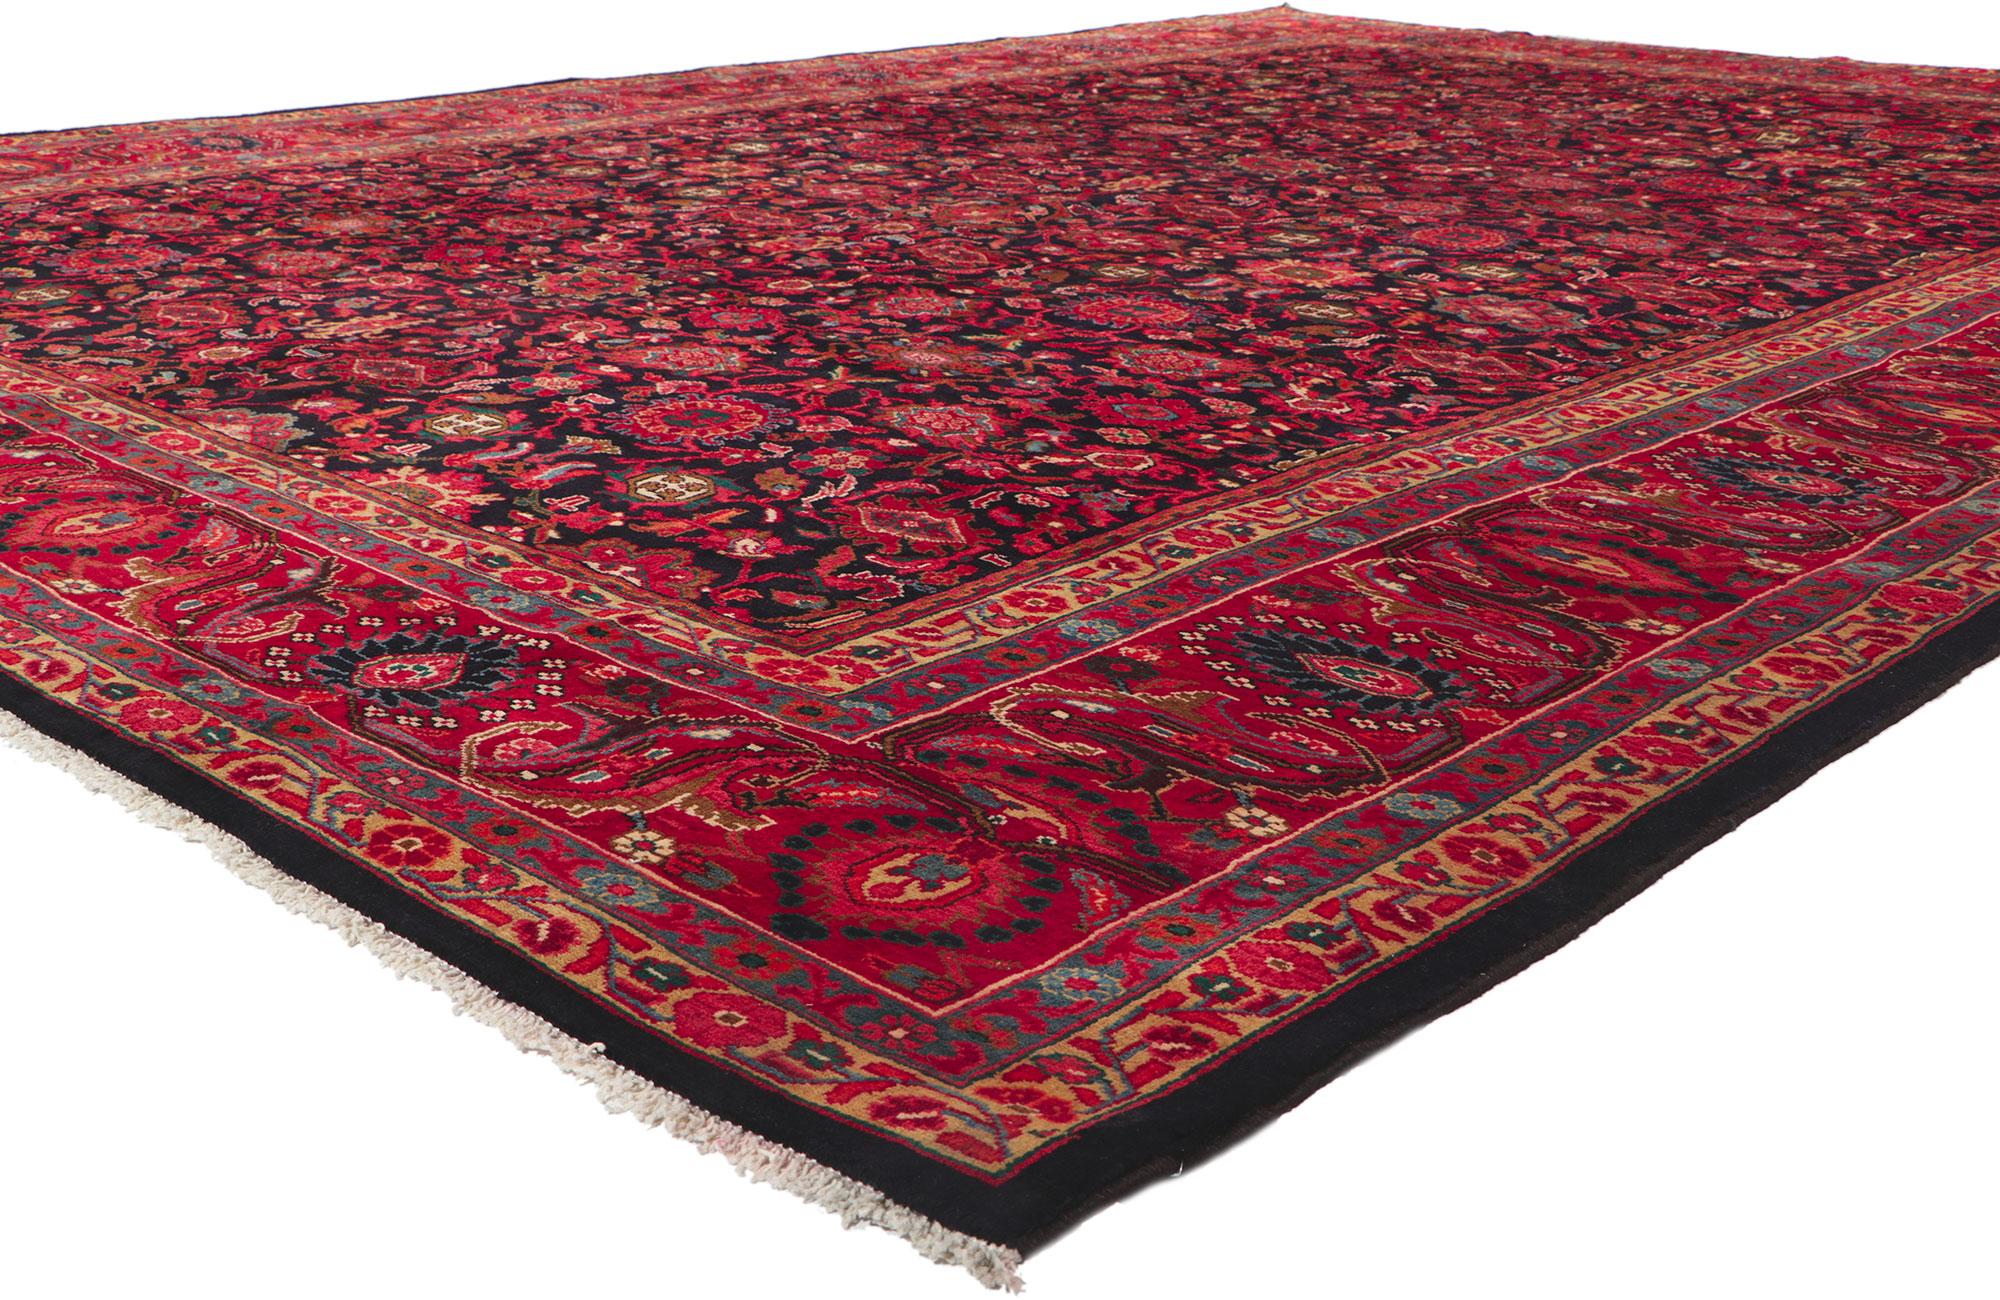 61192 Vintage Persian Malayer rug, 10'07 x 13'11. With its beguiling beauty and rich jewel-tones, this hand-knotted wool vintage Persian Malayer rug is poised to impress. The abrashed ink blue field is covered with a lively all-over botanical